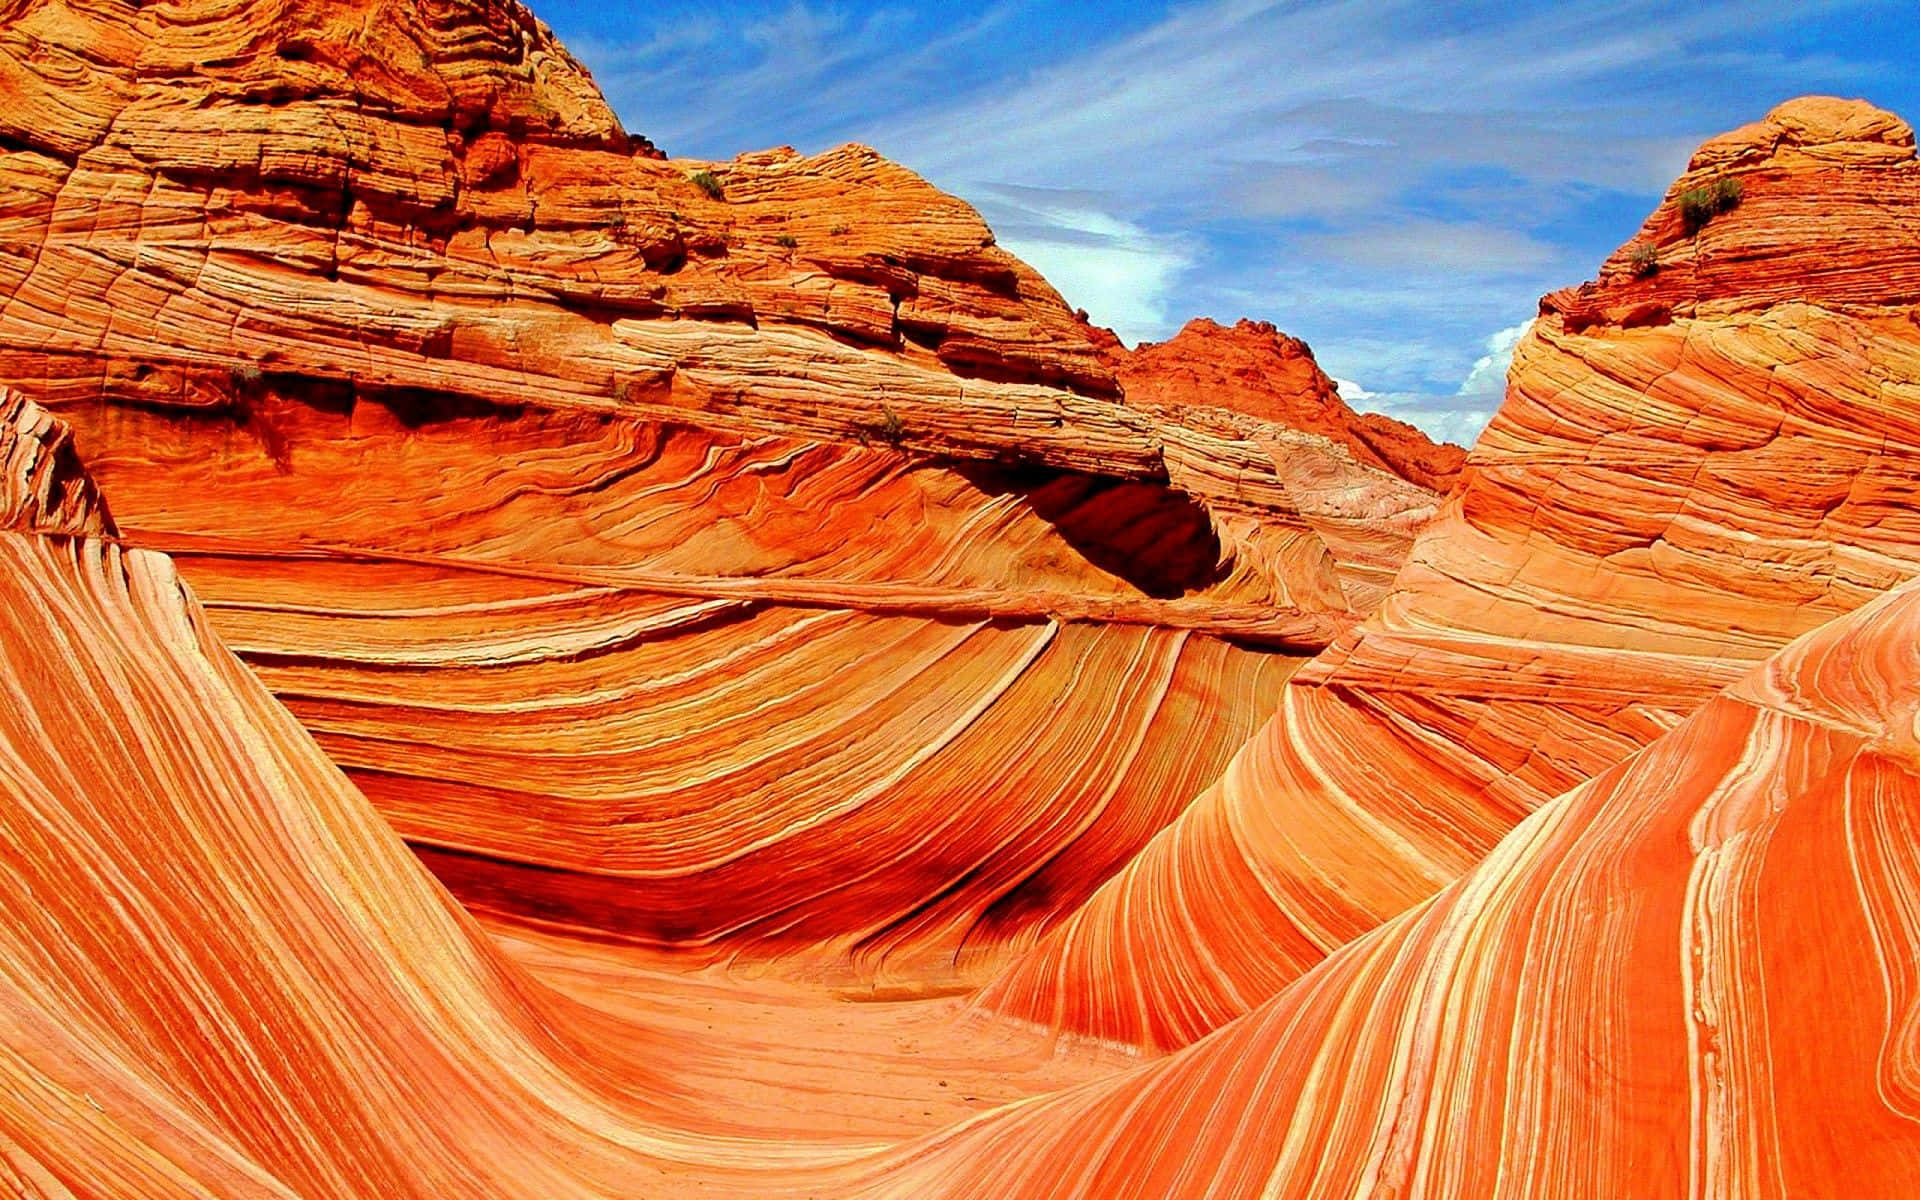 A Red Rock Formation With A Wave Pattern